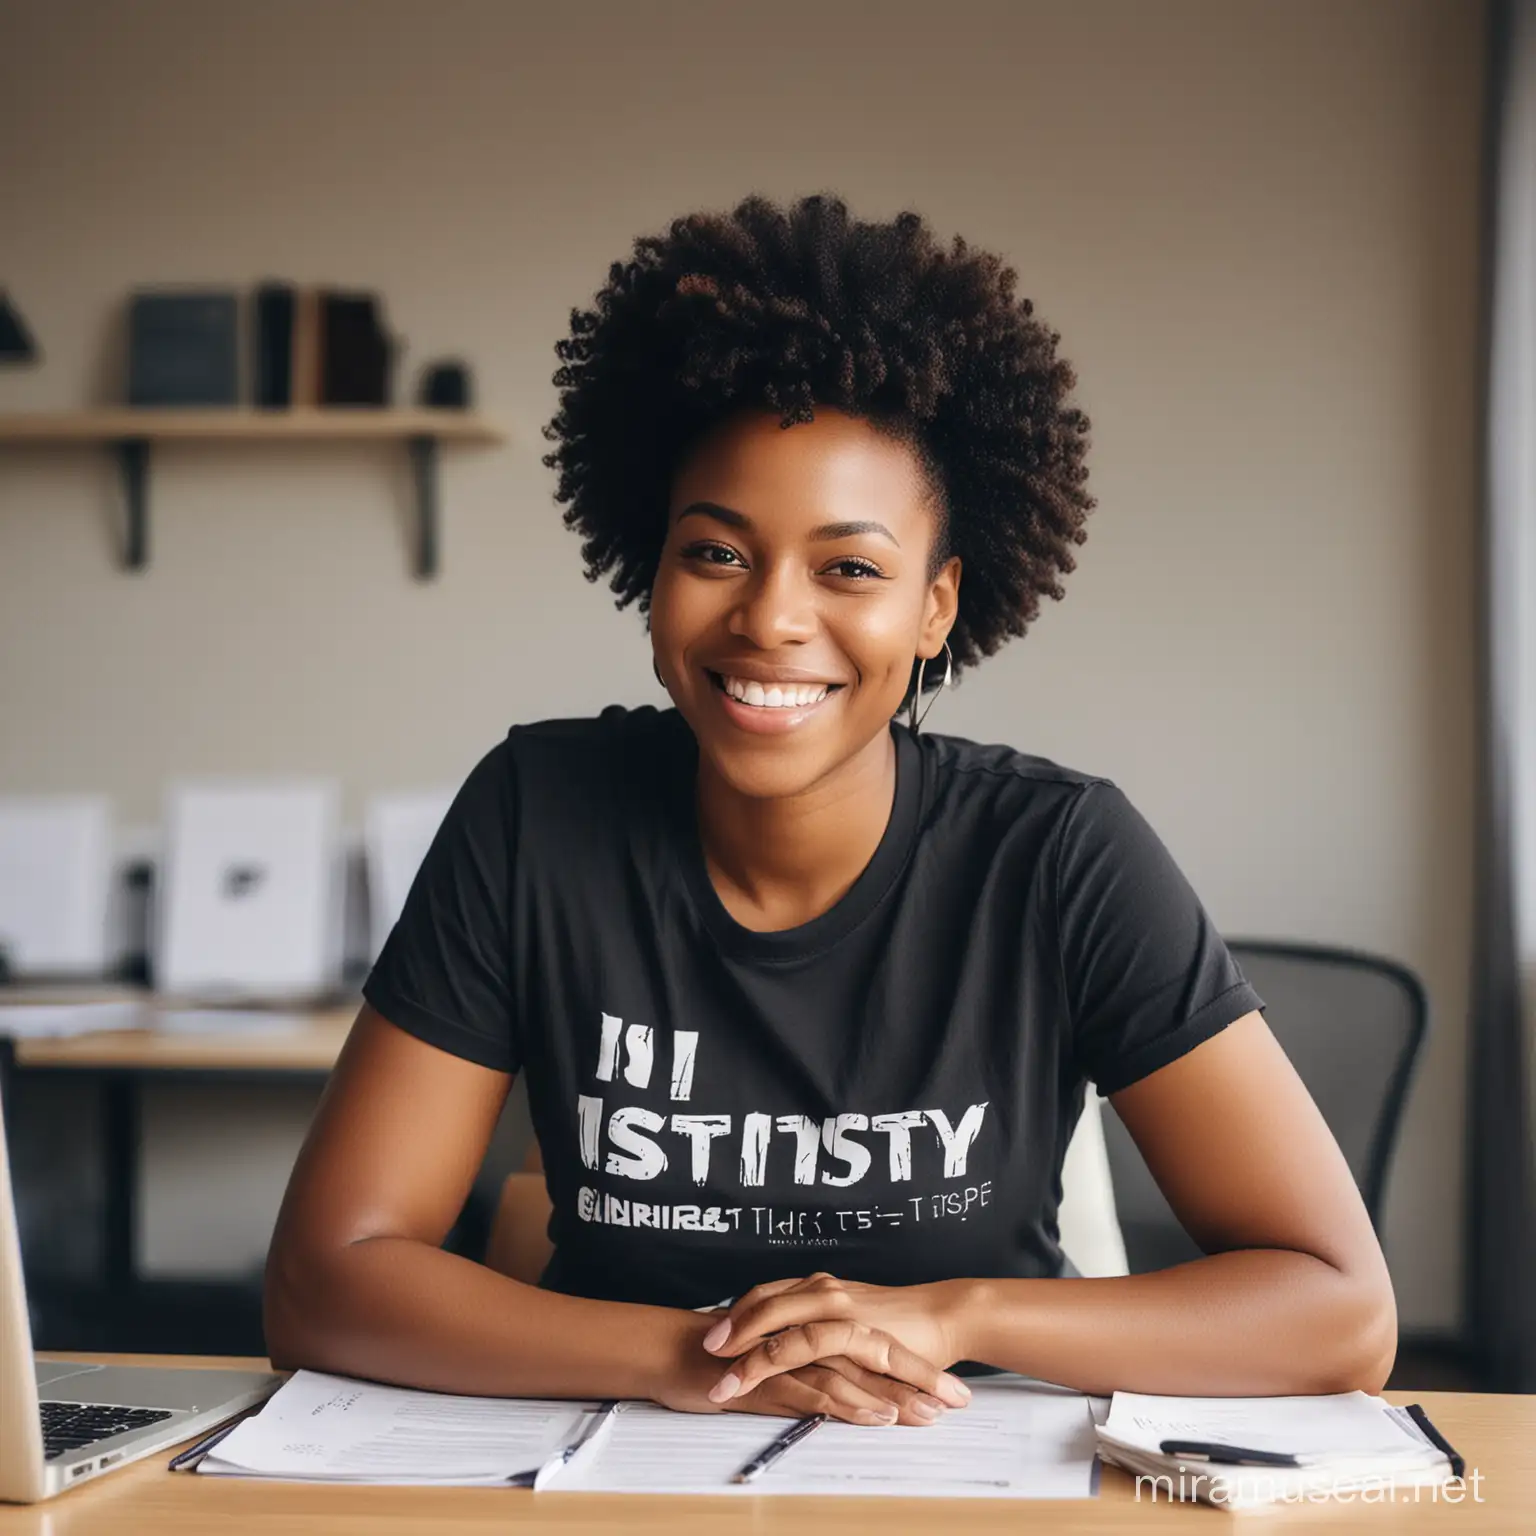 Empowering Portrait of a Smiling Black Woman with I MUST TESTIFY TShirt in Natural Office Light